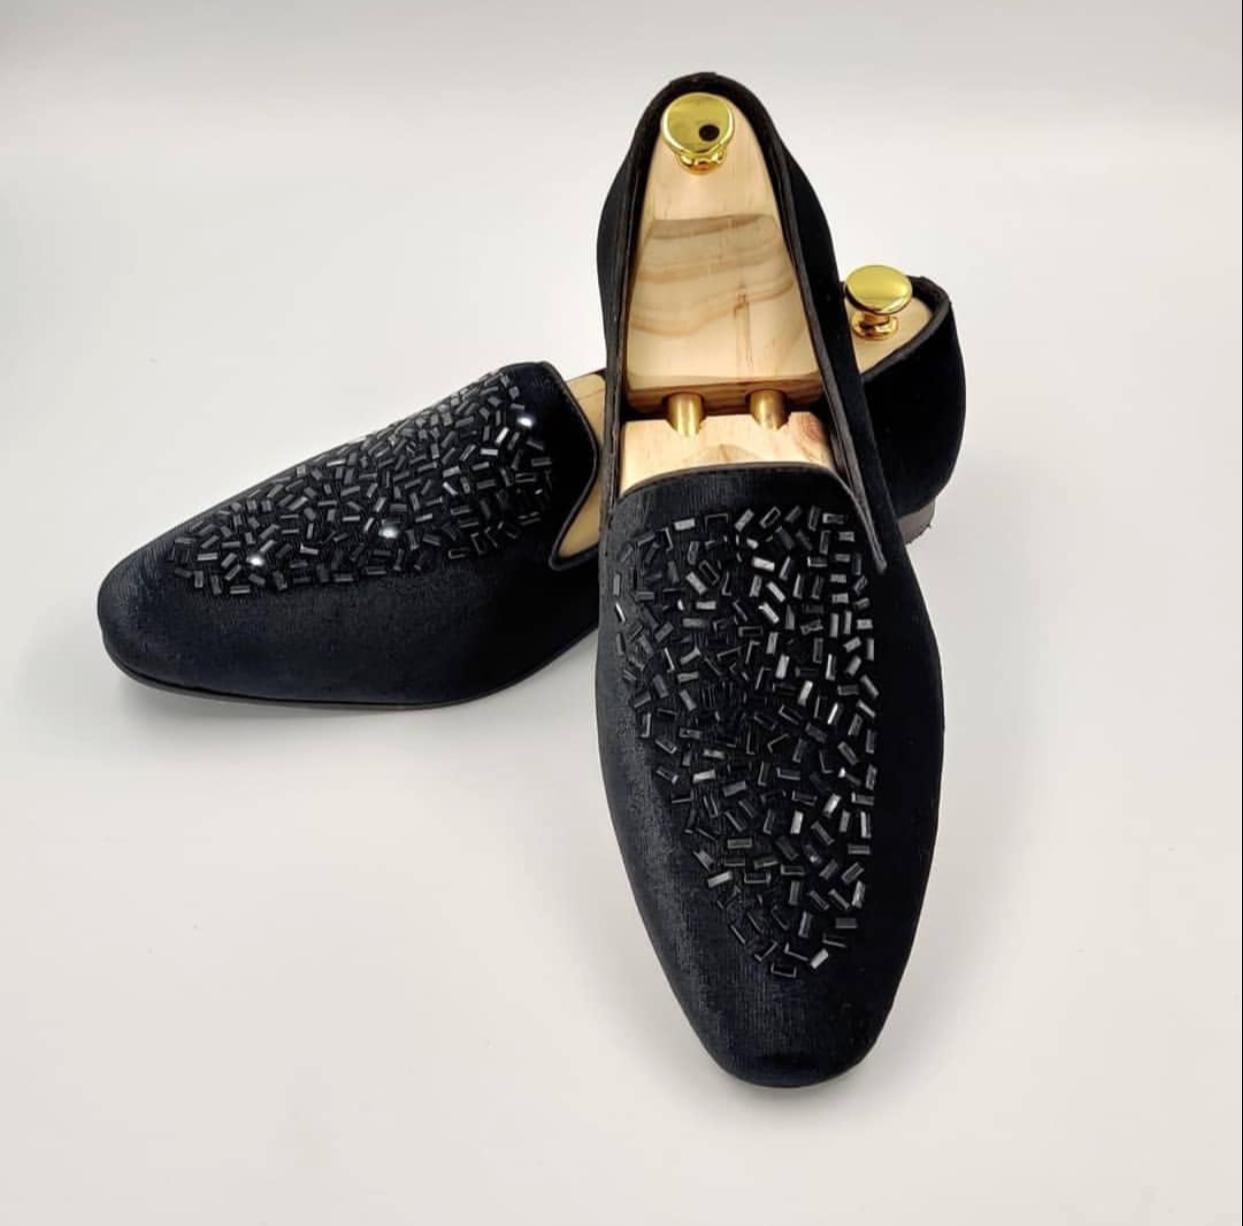 Buy Now Fashion Studded Suede Loafer Shoes For Partywear And Casualwear - JackMarc - JACKMARC.COM